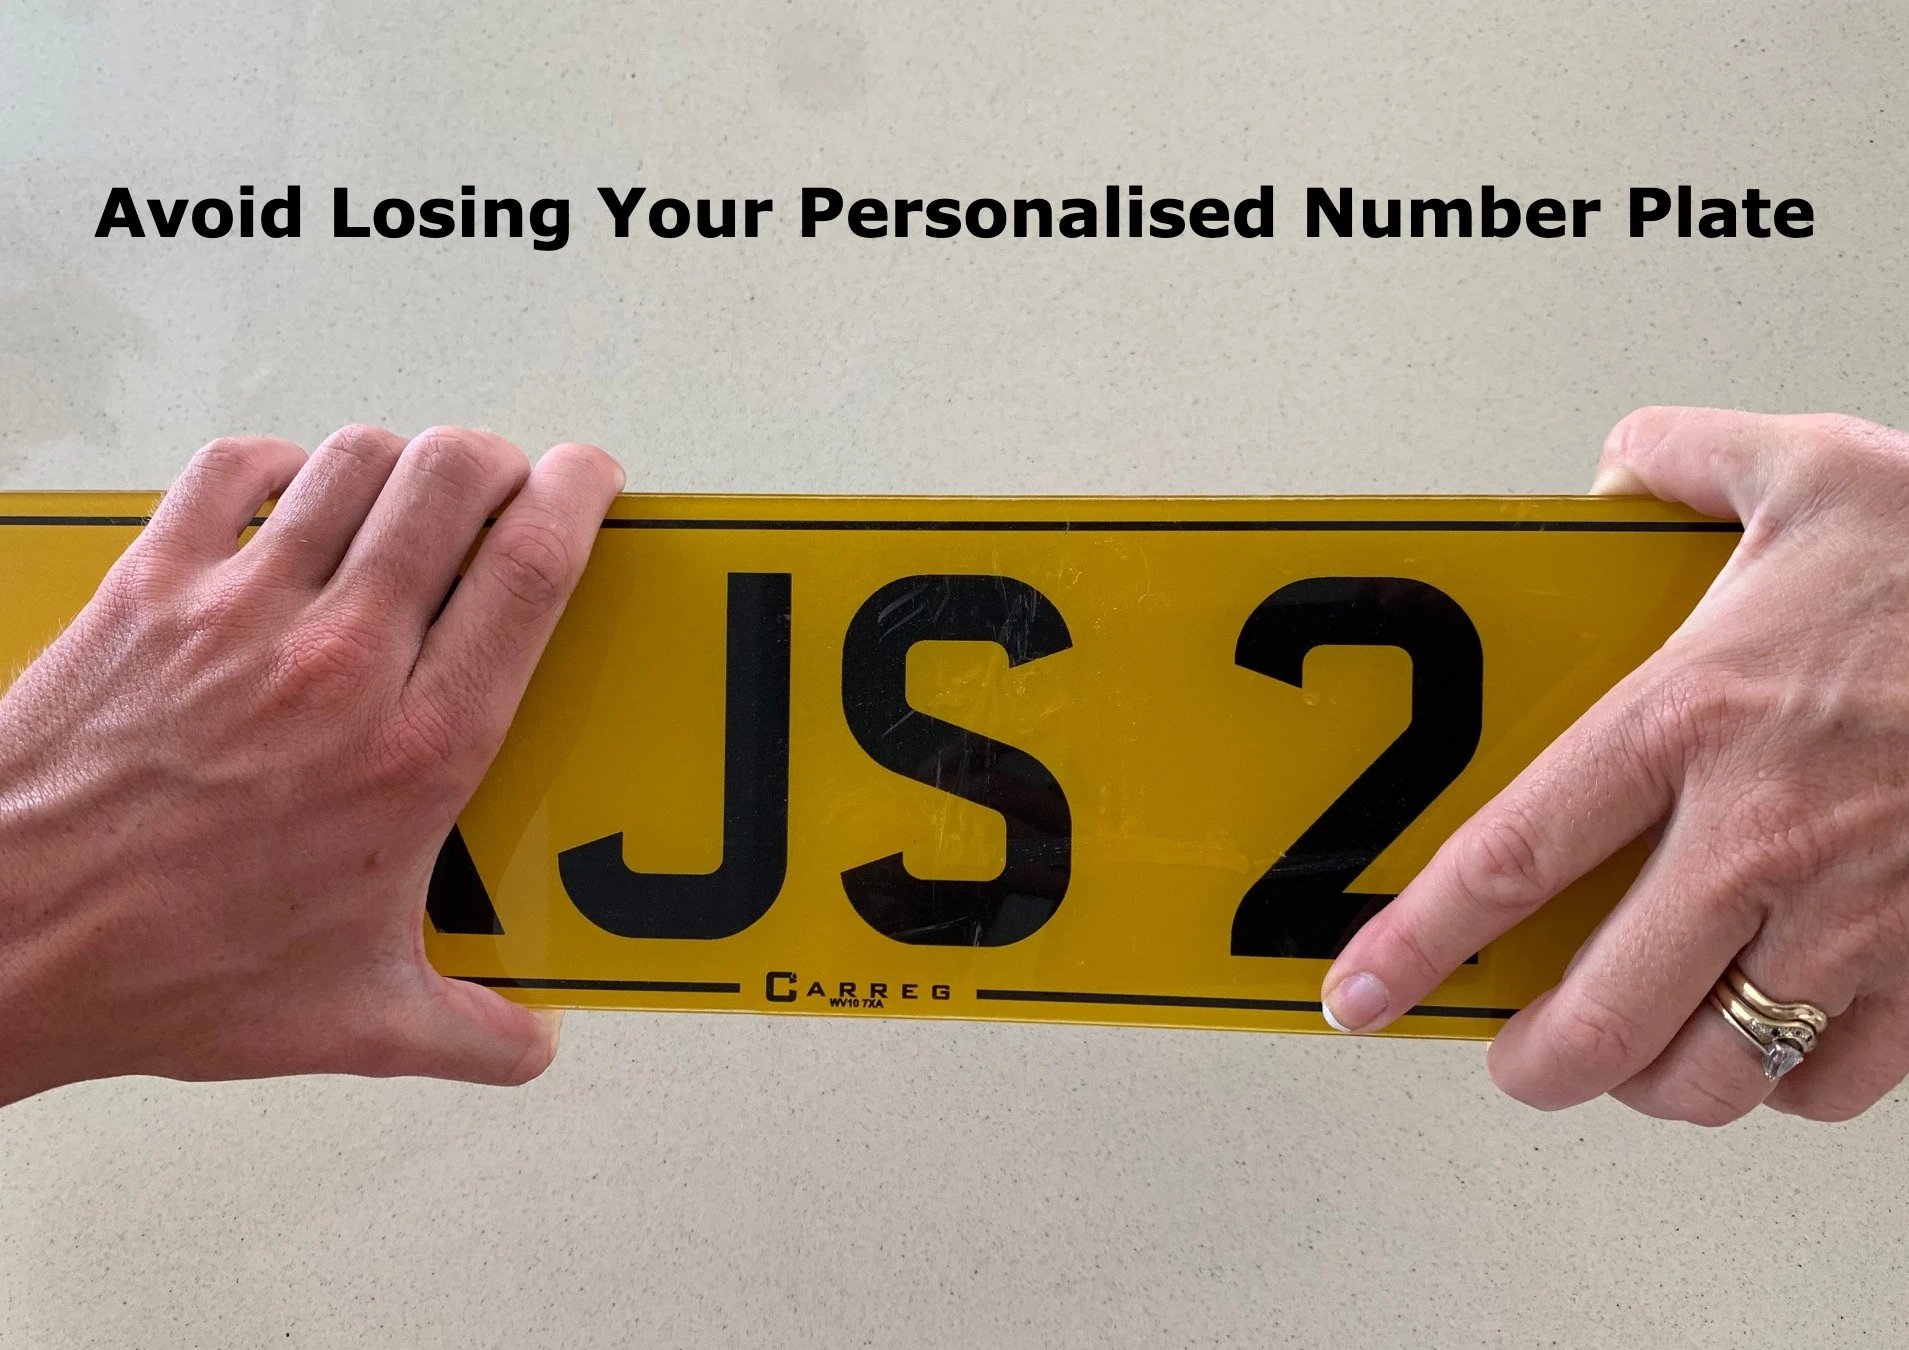 Avoid Losing Your Personalised Number Plate